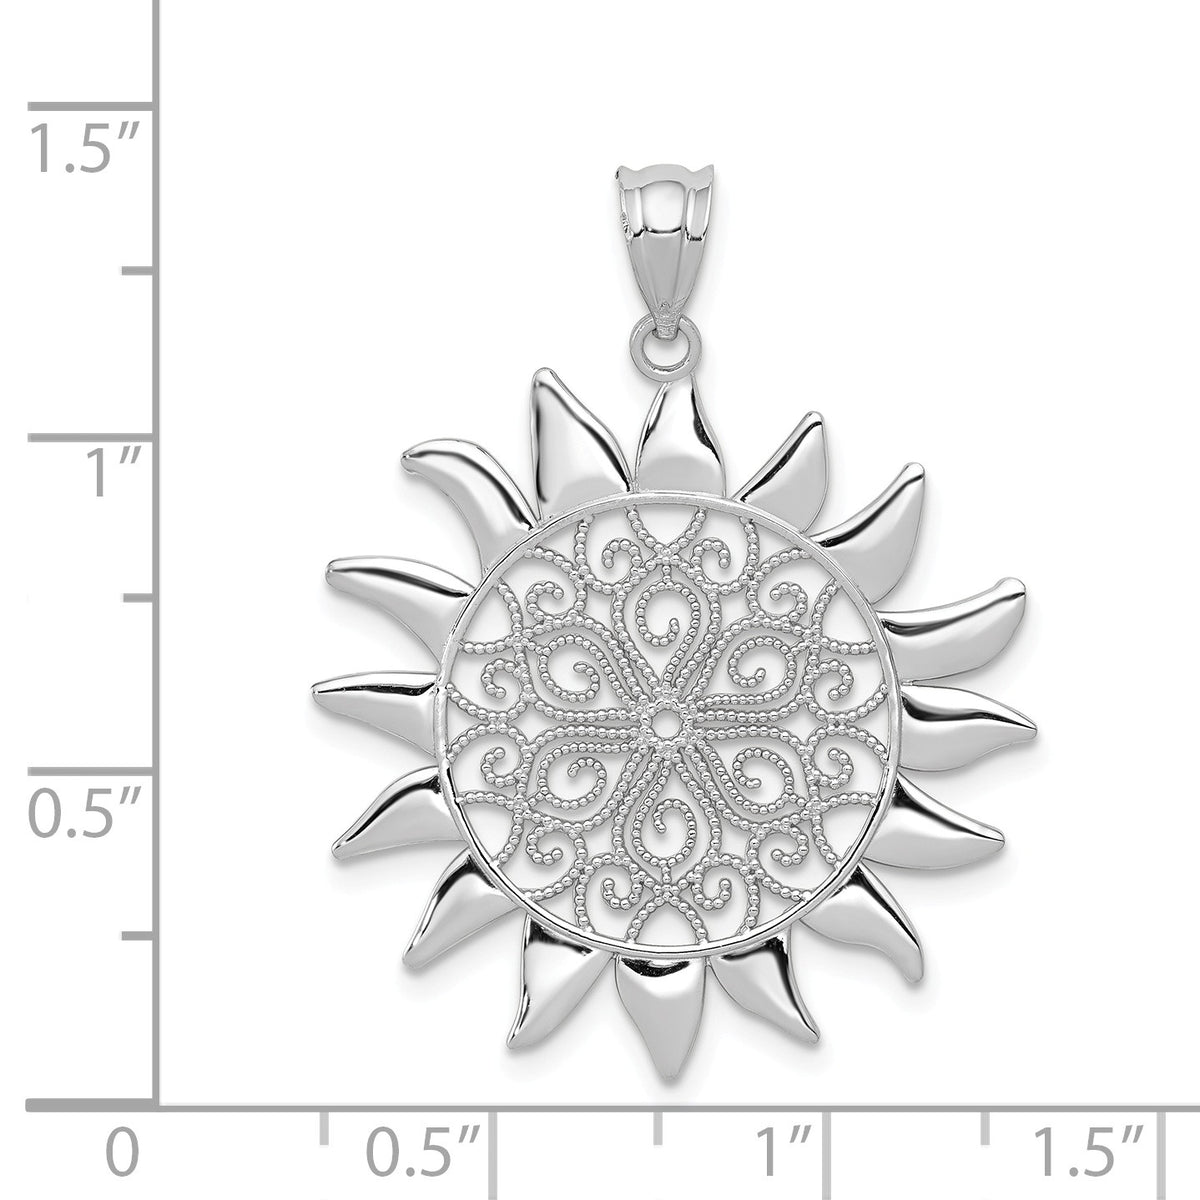 Alternate view of the 14k White Gold Filigree Sun Pendant, 27mm by The Black Bow Jewelry Co.